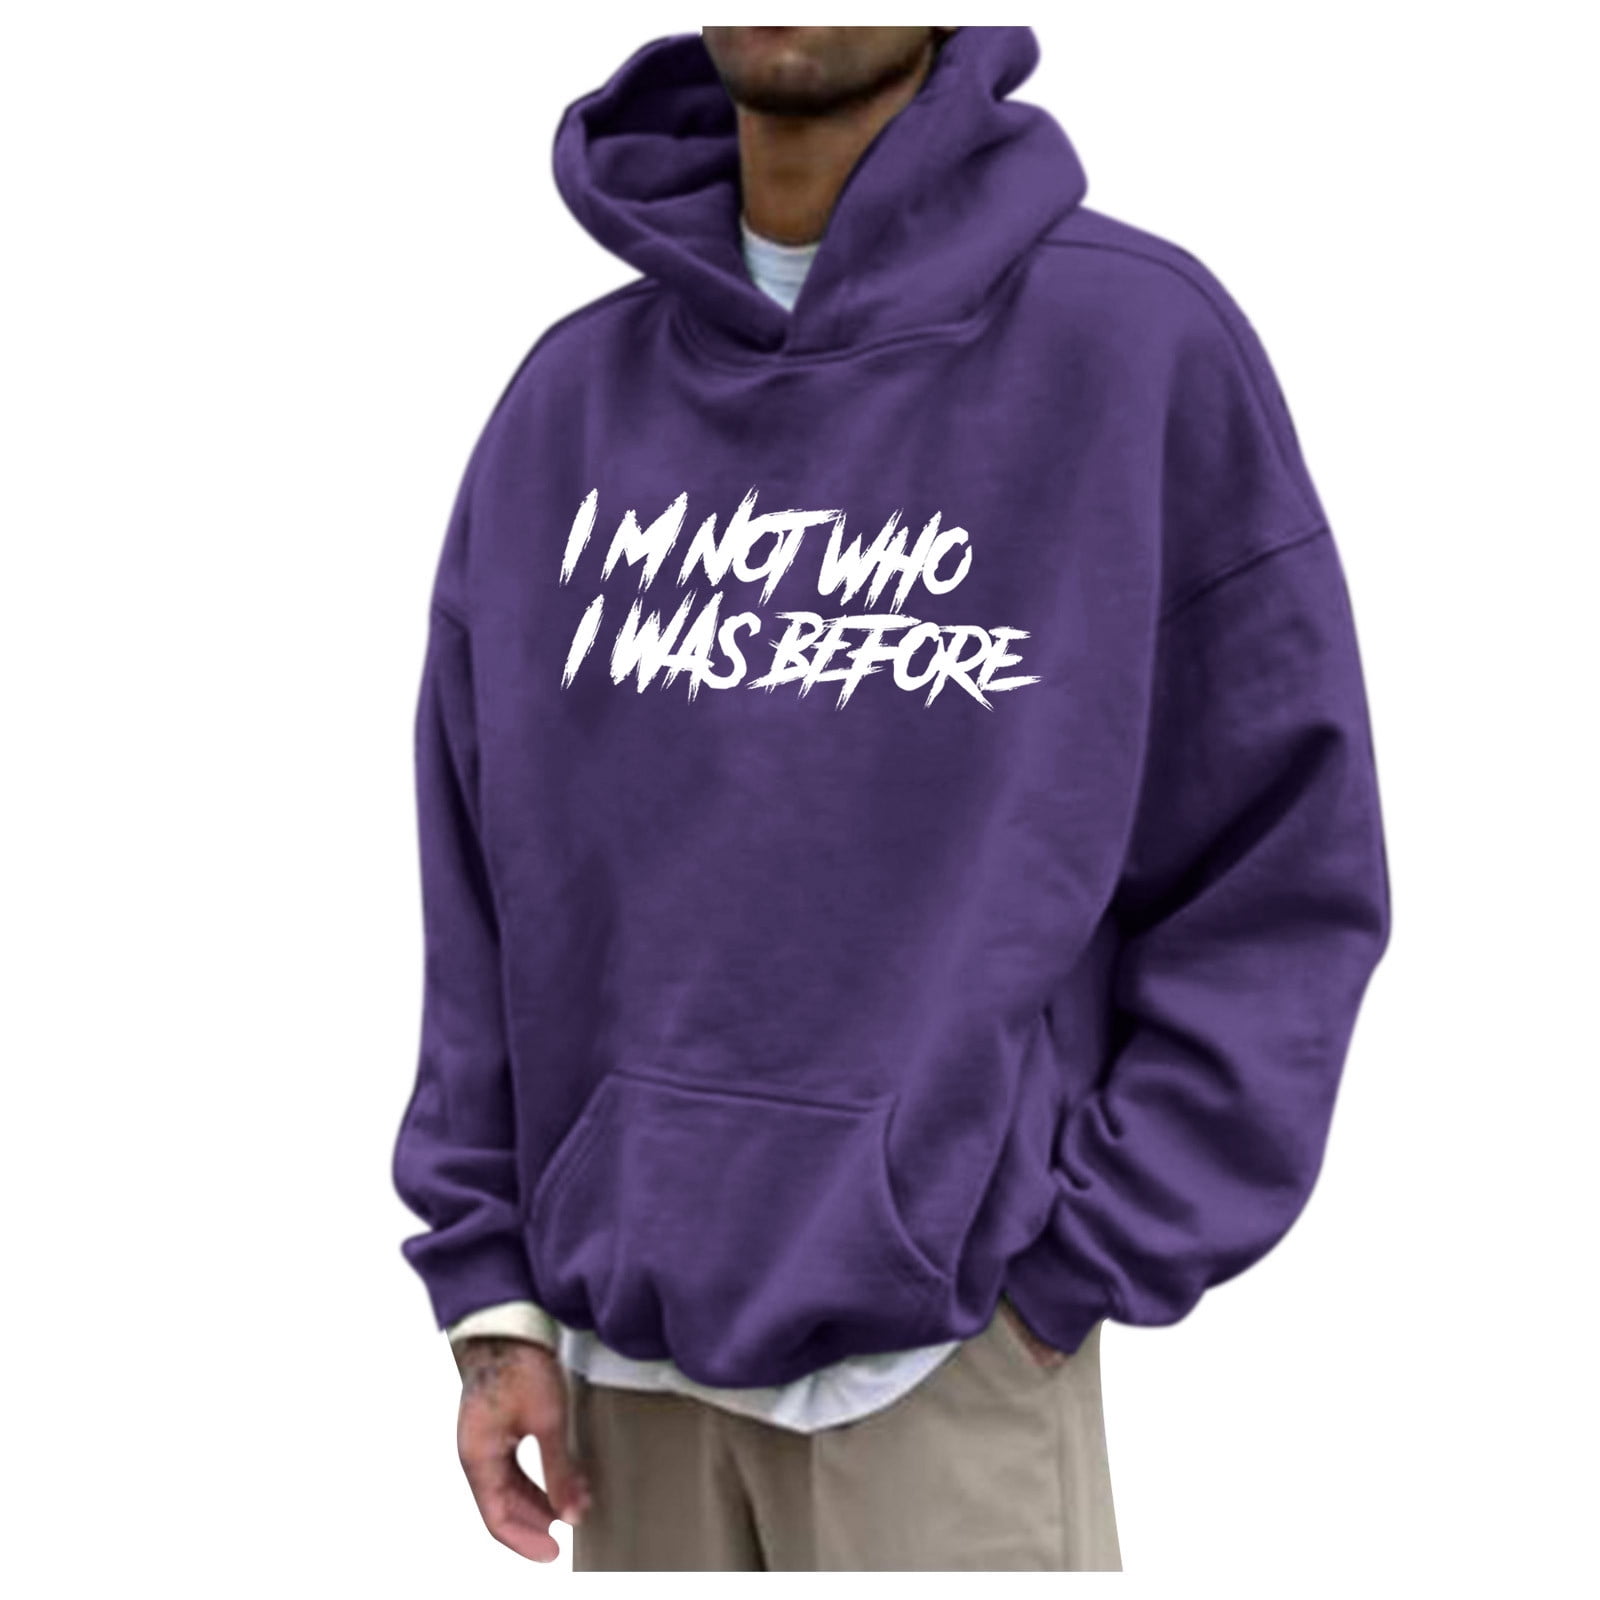 OML i was just looking for a good looking purple hoodie and there is so  many freaking botted ones also, when you look at the clothing section you  see these overpriced clothing